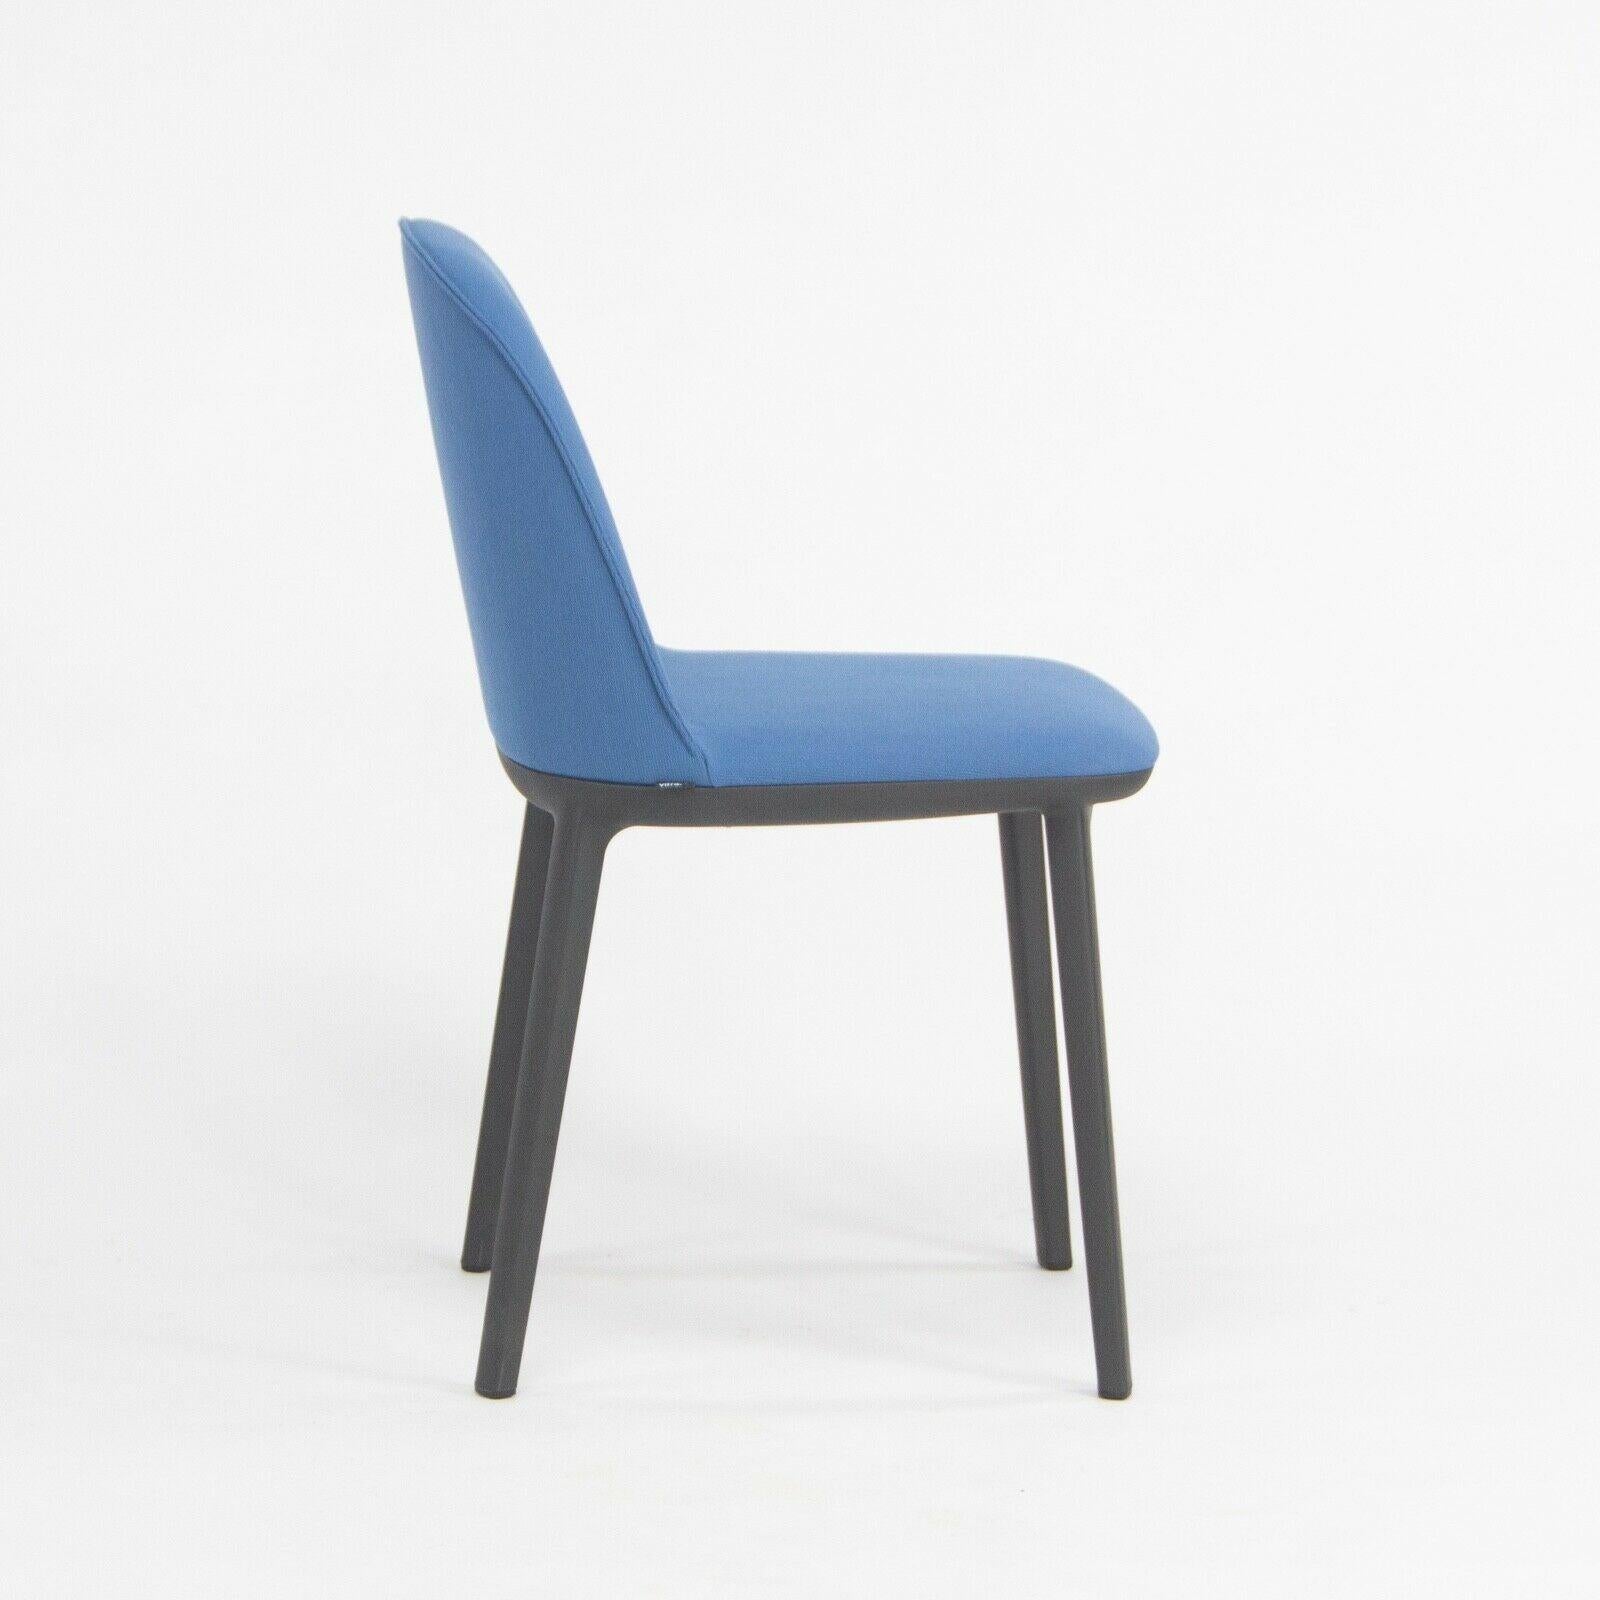 2019 Vitra Softshell Side Chair w/ Light Blue Fabric by Ronan & Erwan Bouroullec For Sale 1